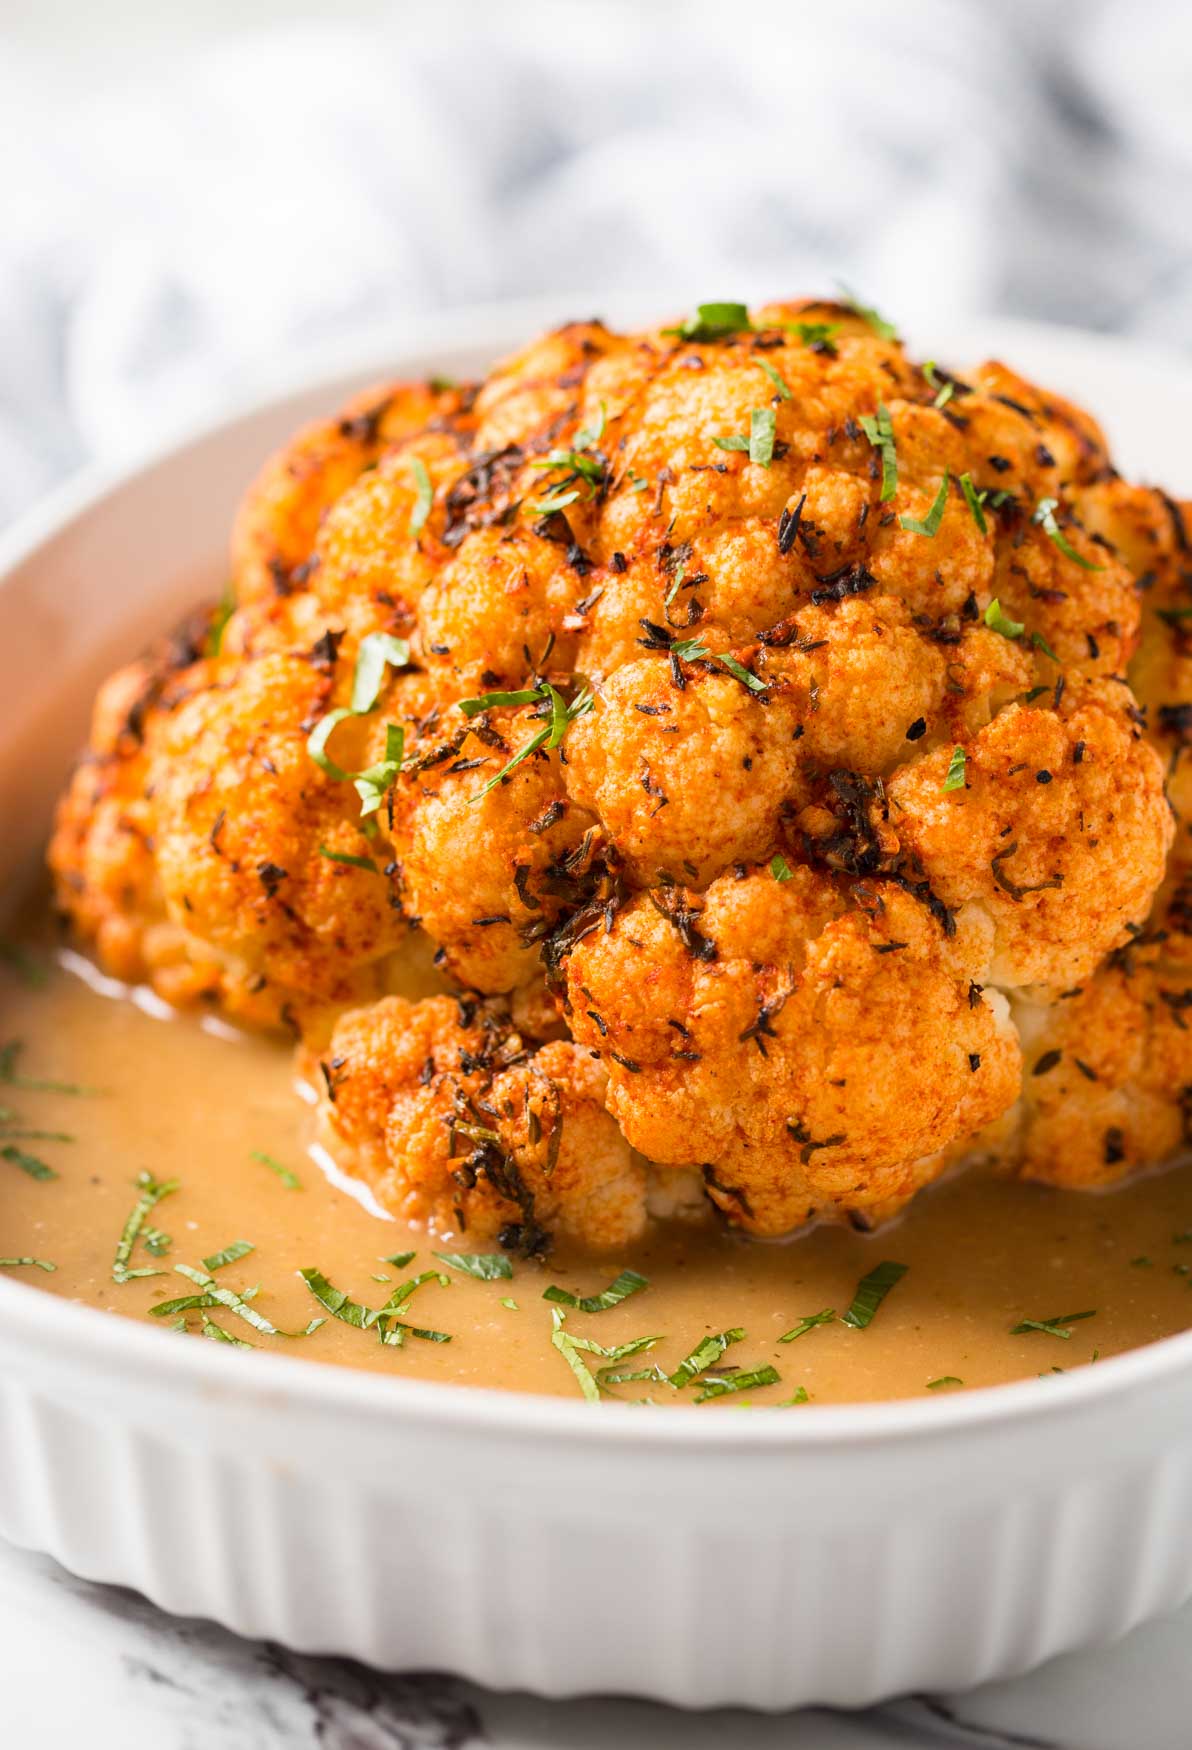 Healthy Instant Pot Cauliflower - cook whole cauliflower head in the pressure cooker and serve with delicious creamy gravy to make it more flavorful. Perfect vegetarian and vegan recipe for the holiday dinner or weeknight healthy meal. | #watchwhatueat #veganthanksgiving #vegan #cauliflower